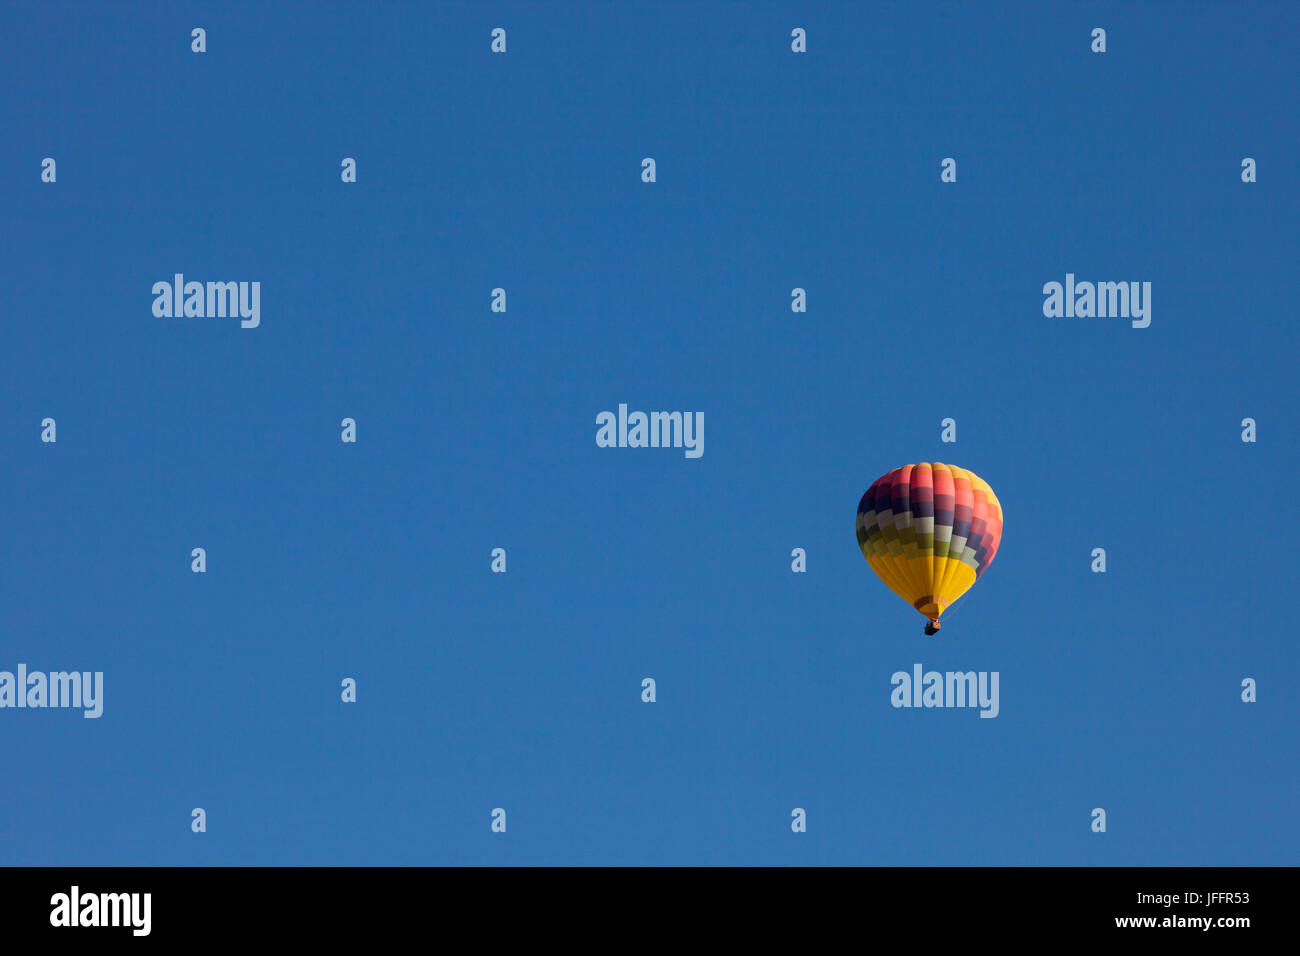 A hot air balloon flying in a clear, blue sky. Stock Photo